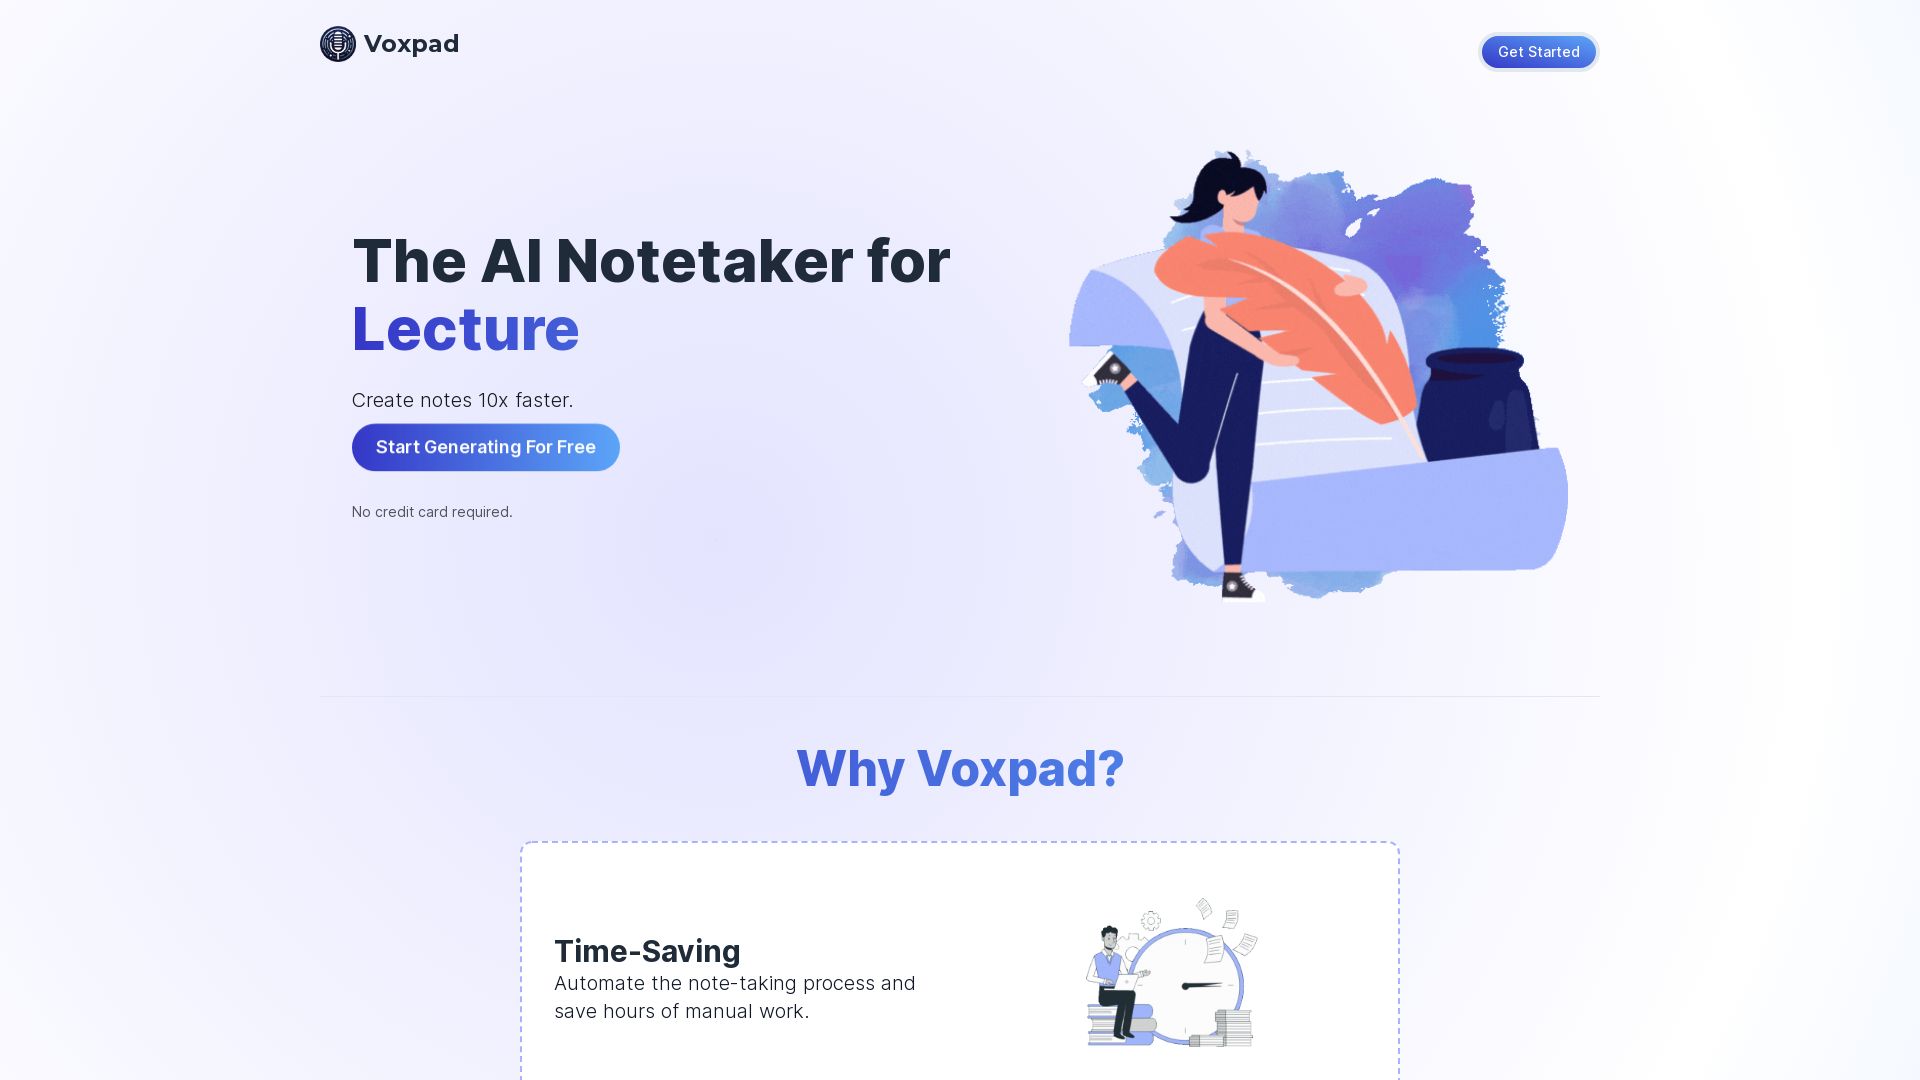 Voxpad - AI Notetaker for Converting Video and Audio into Detailed, Customizable Notes. Lecture Notes, Meeting Notes, and more!